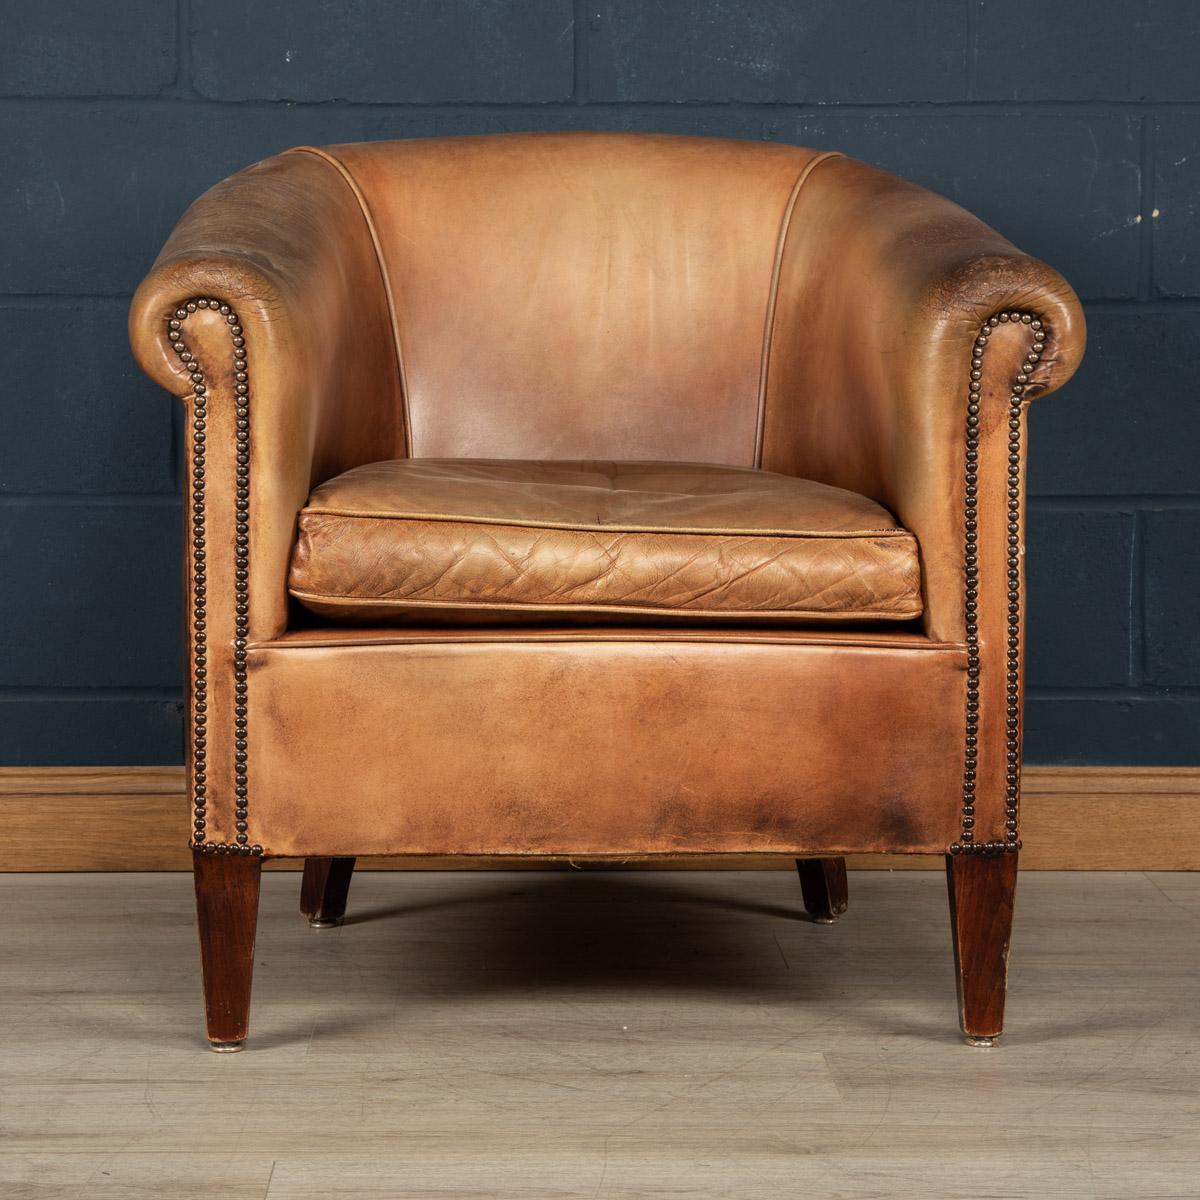 Showing superb patina and colour, this wonderful club chair is a slightly “oversized“ version and was hand upholstered in sheepskin leather in Holland by the finest craftsmen.

Condition
In Good Condition - some wear consistent with normal use.